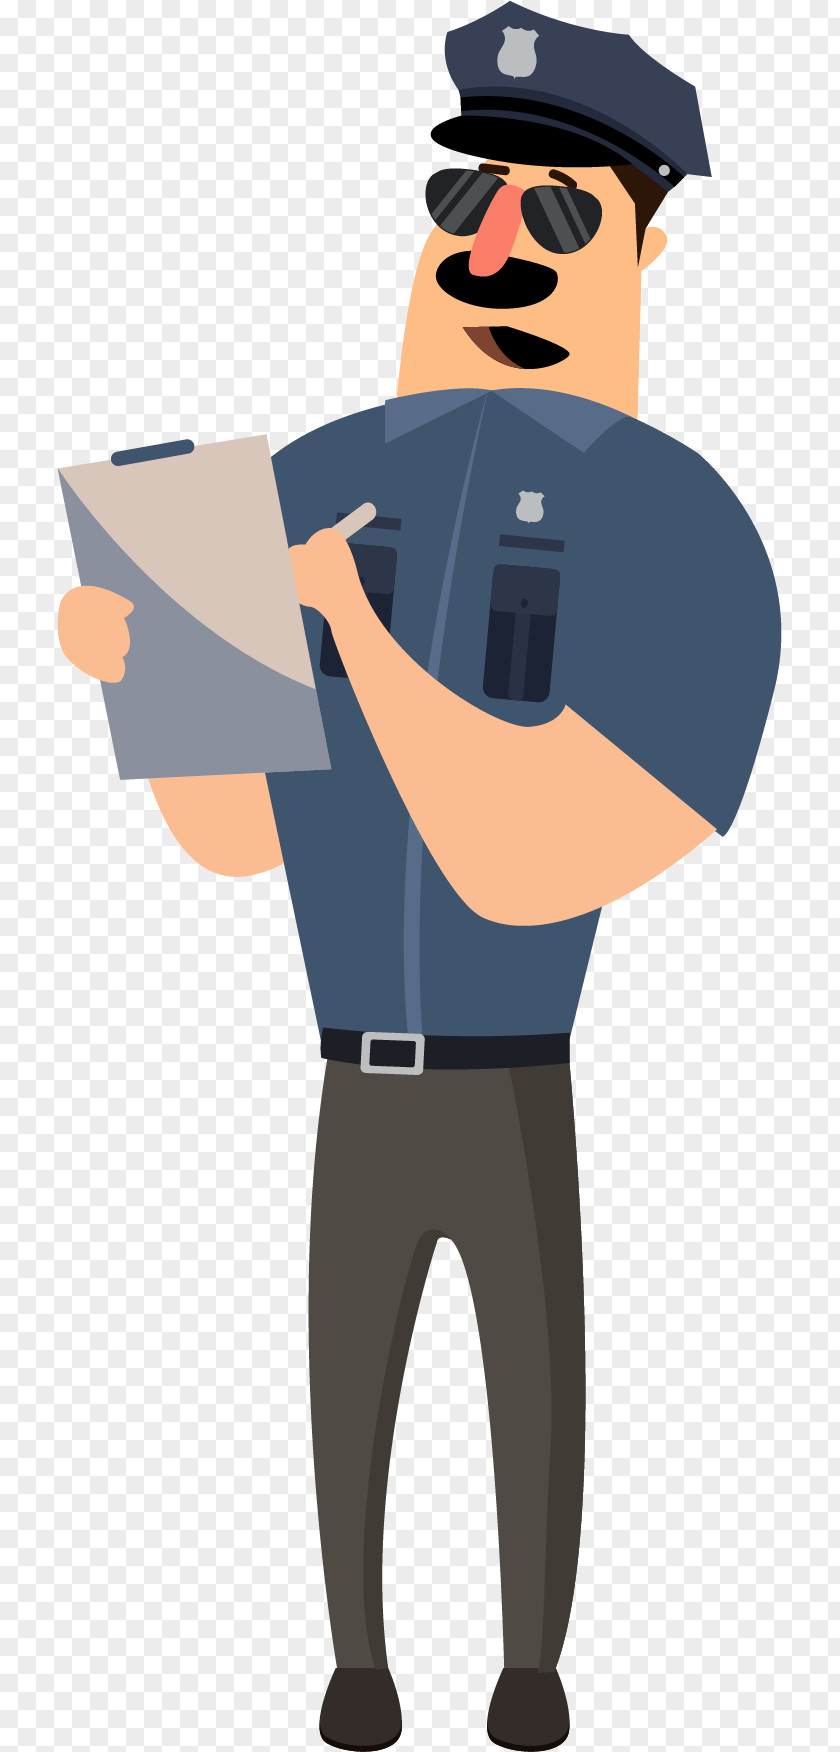 A Recording Officer Police Cartoon PNG